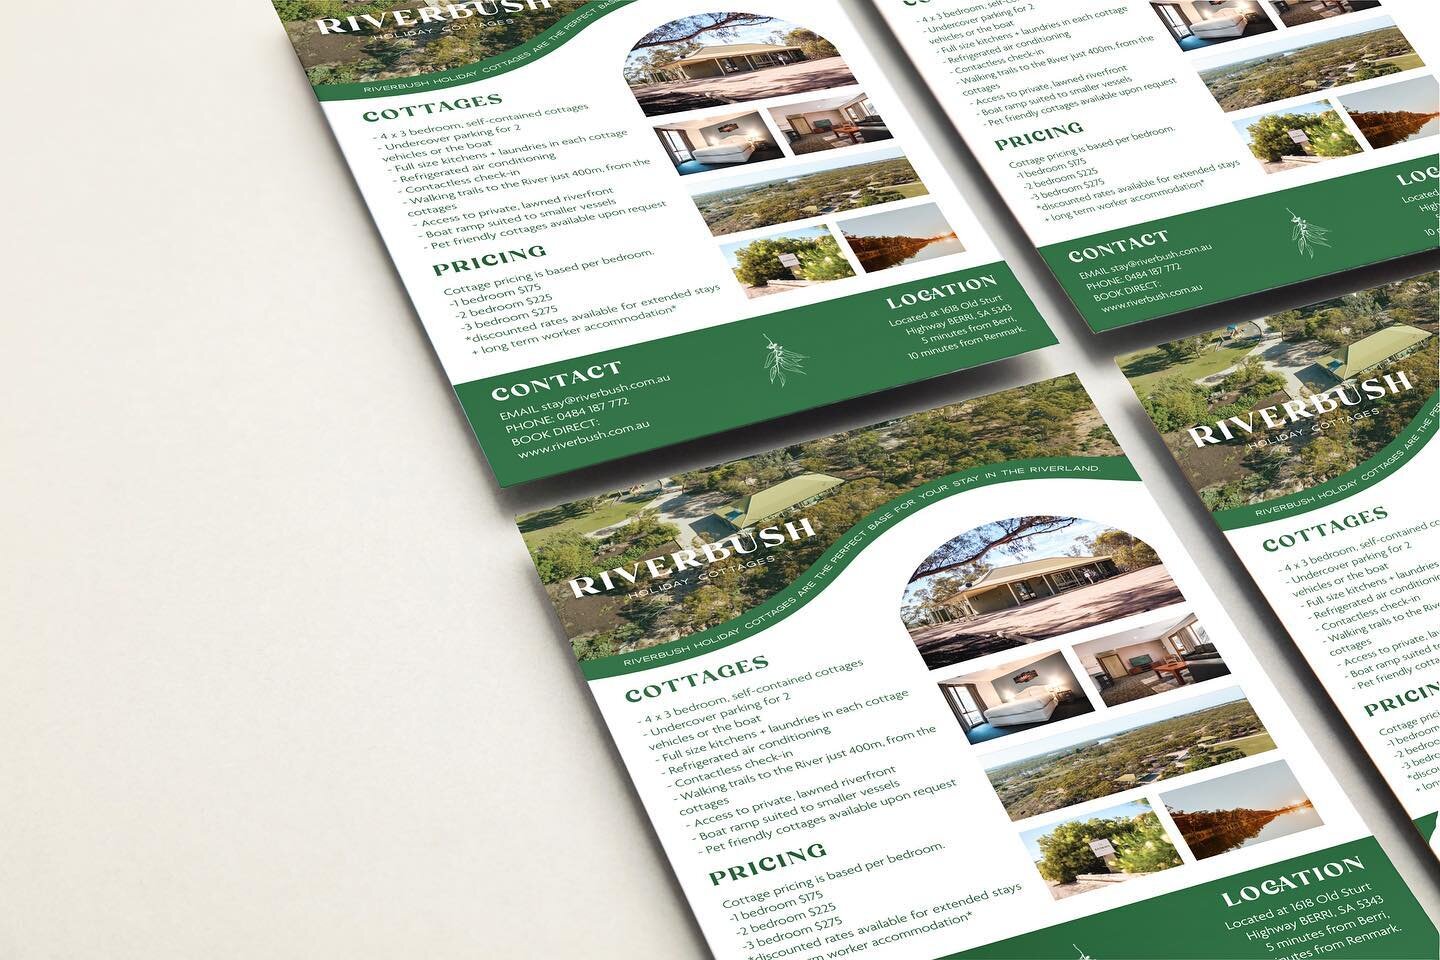 Riverbush Holiday Cottages&rsquo; flyer

Loved working on this project for @morganpfitzner . I had so much fun working with this biz as it shows off the beautiful landscape of the riverland. 

#design #graphicdesigner #riverland #flyer #river #graphi